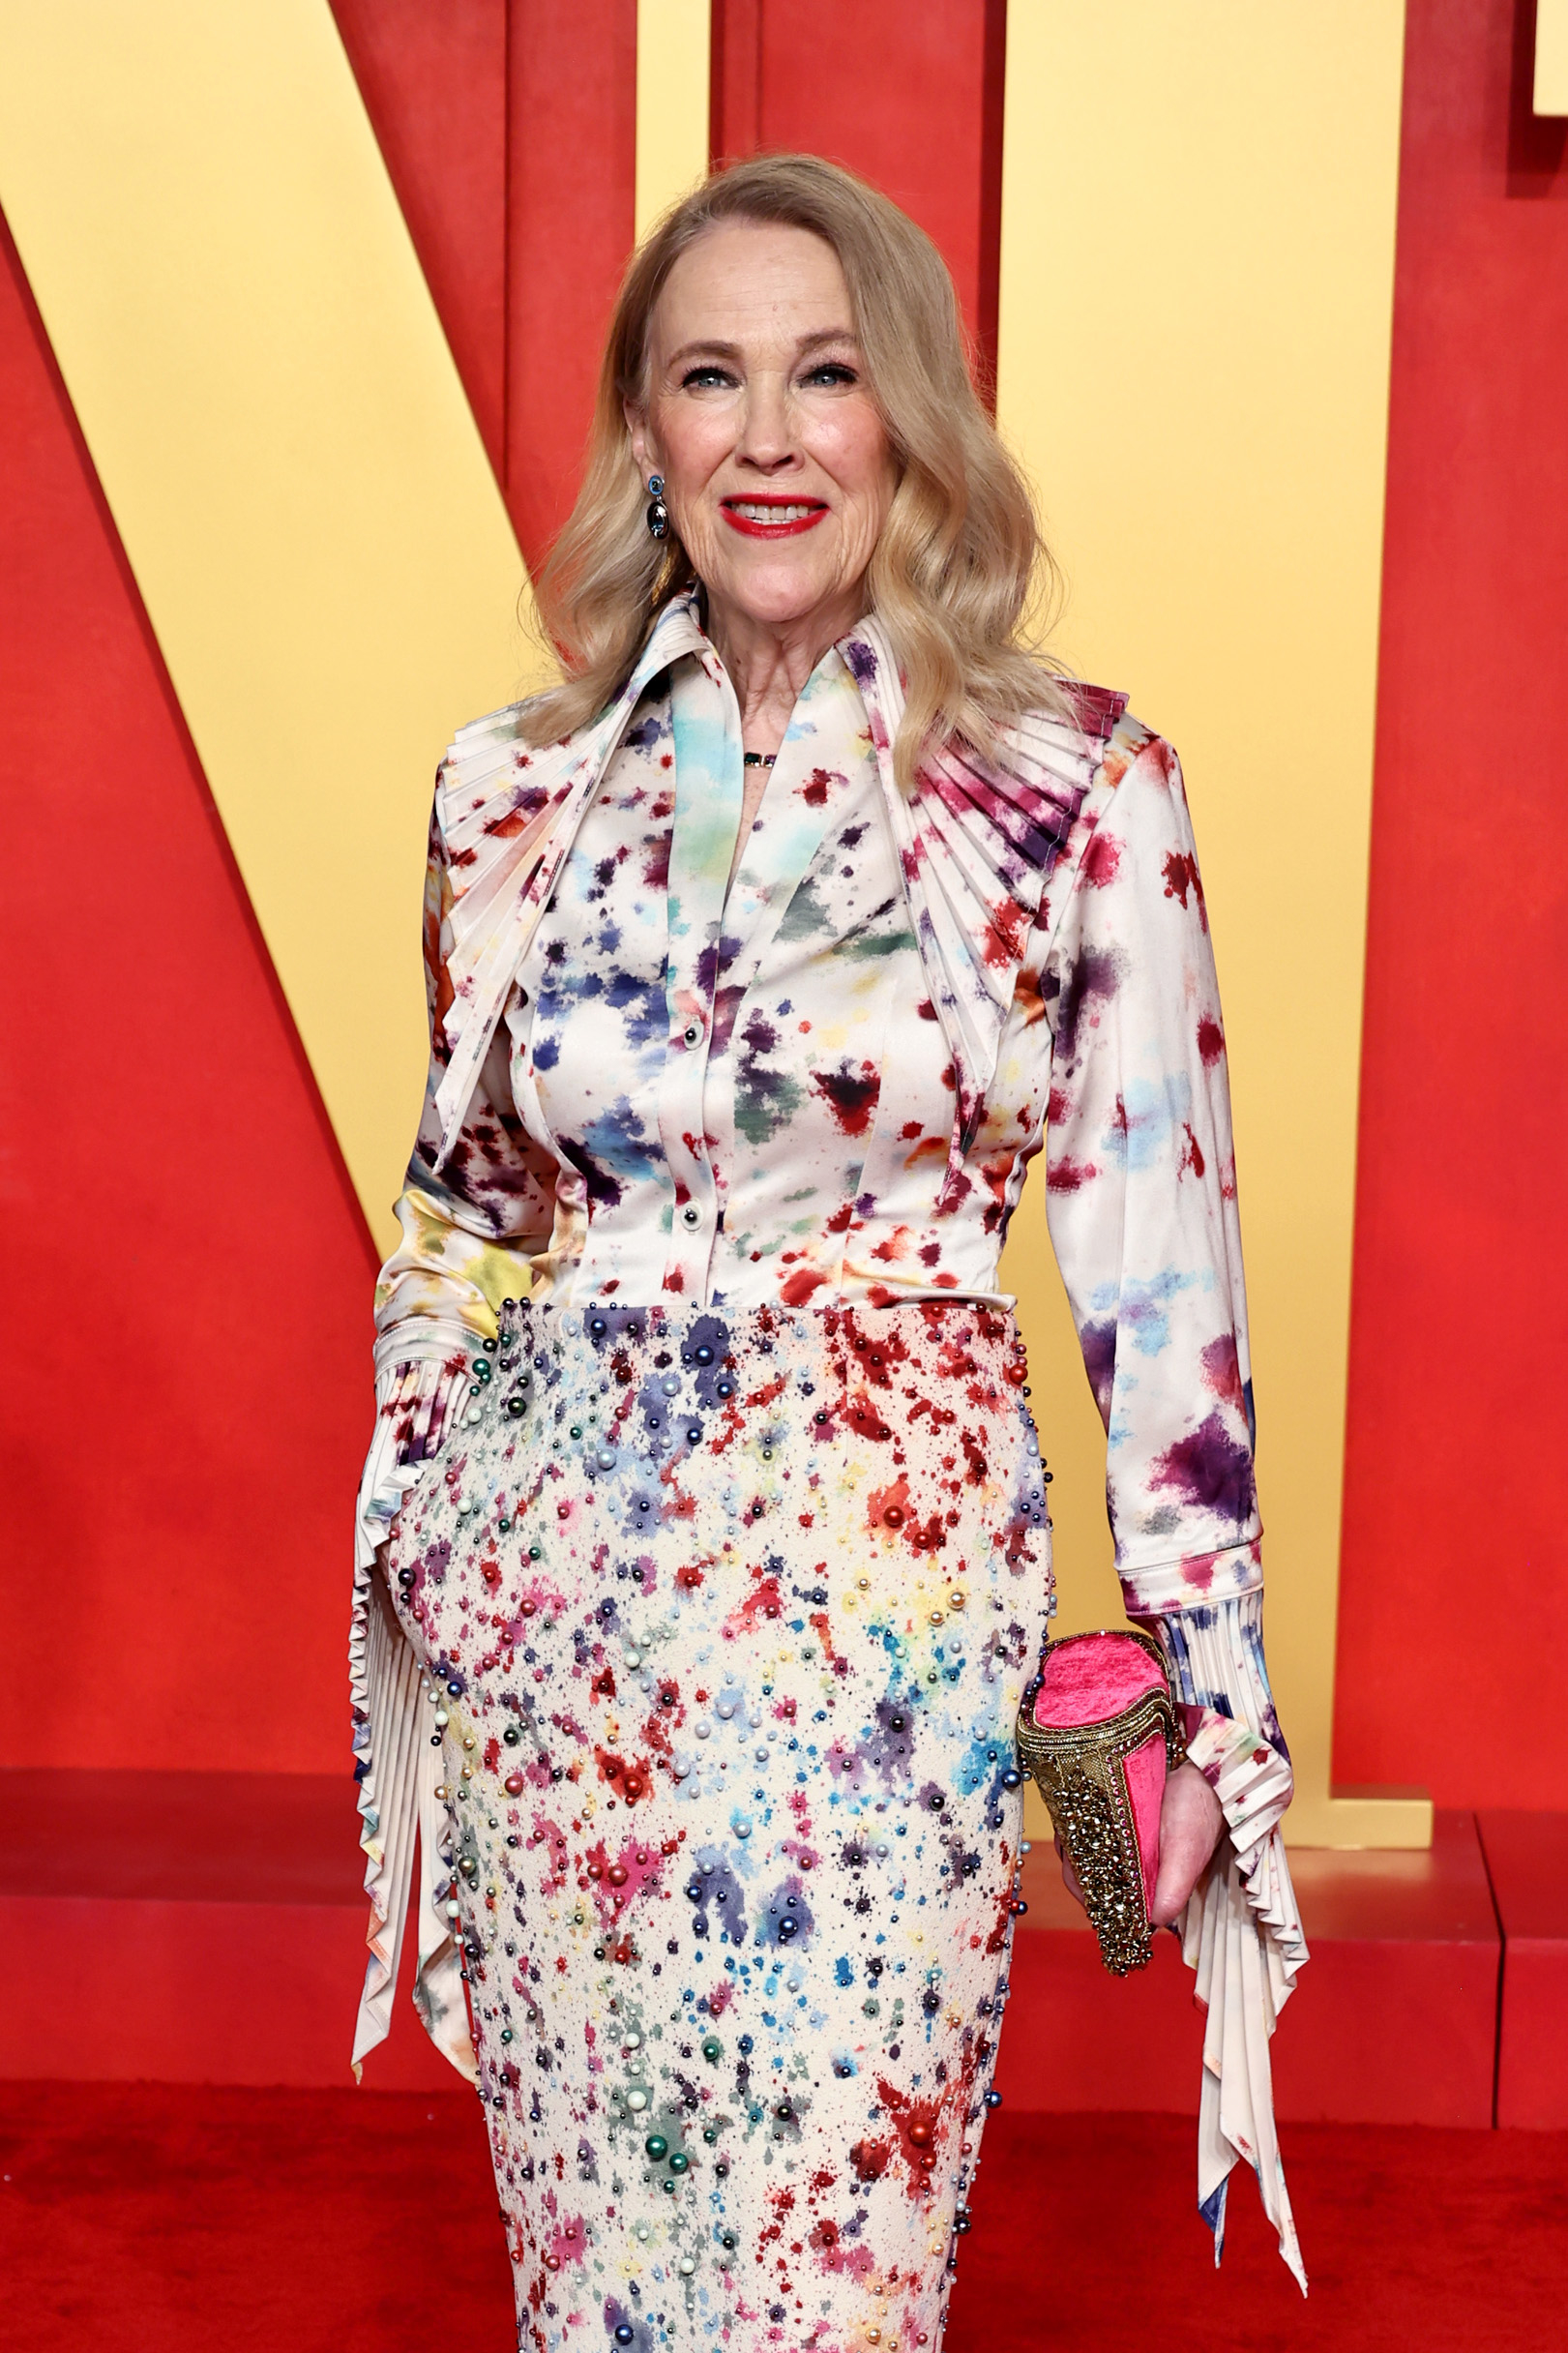 Woman in a painterly splattered suit with a bow tie blouse and embellished clutch posing on red carpet